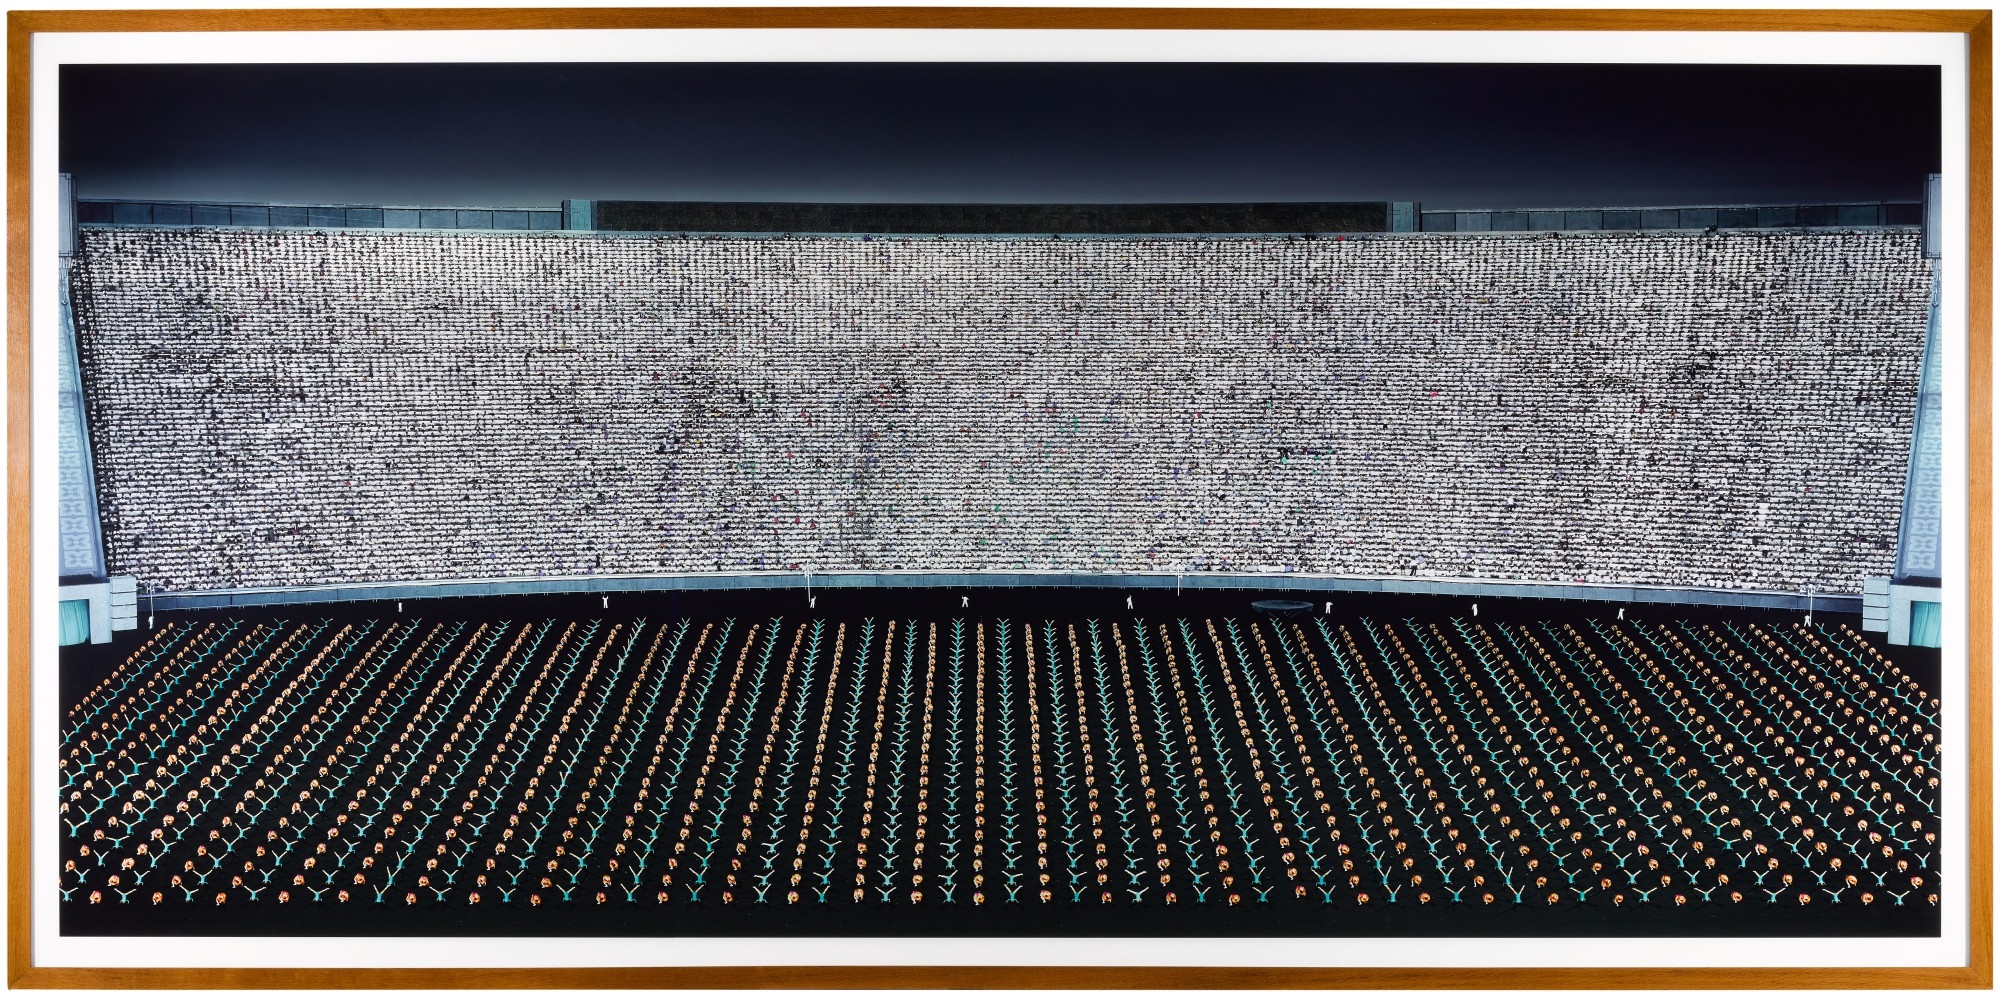 Pyongyang III by Andreas Gursky, Executed in 2007